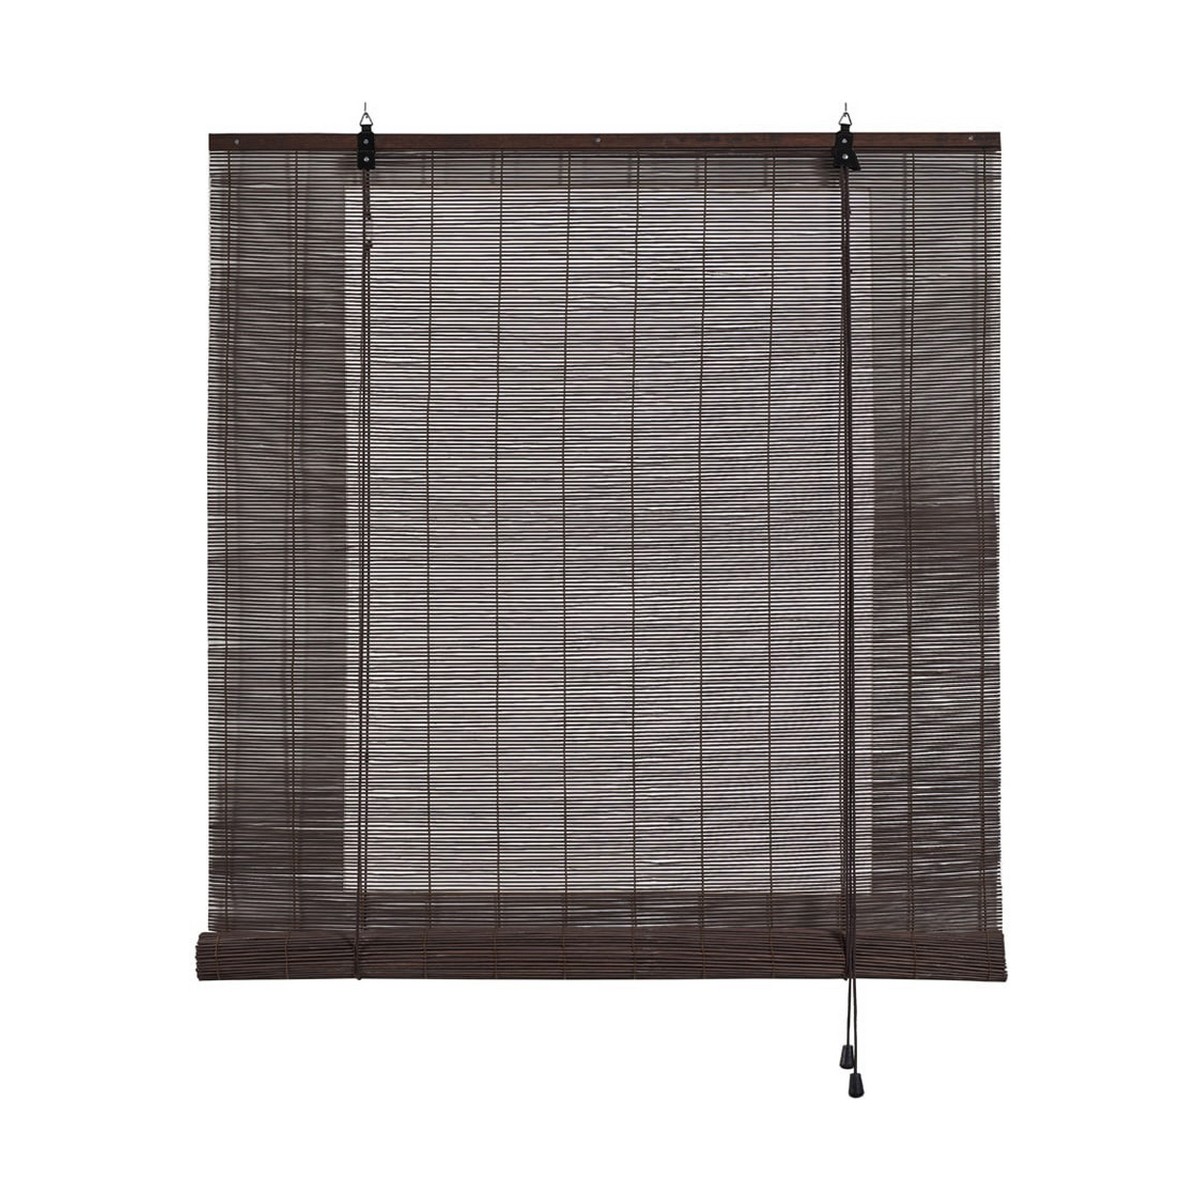 Roller blinds Stor Planet Ocre Dark brown Bamboo (120 x 175 cm)